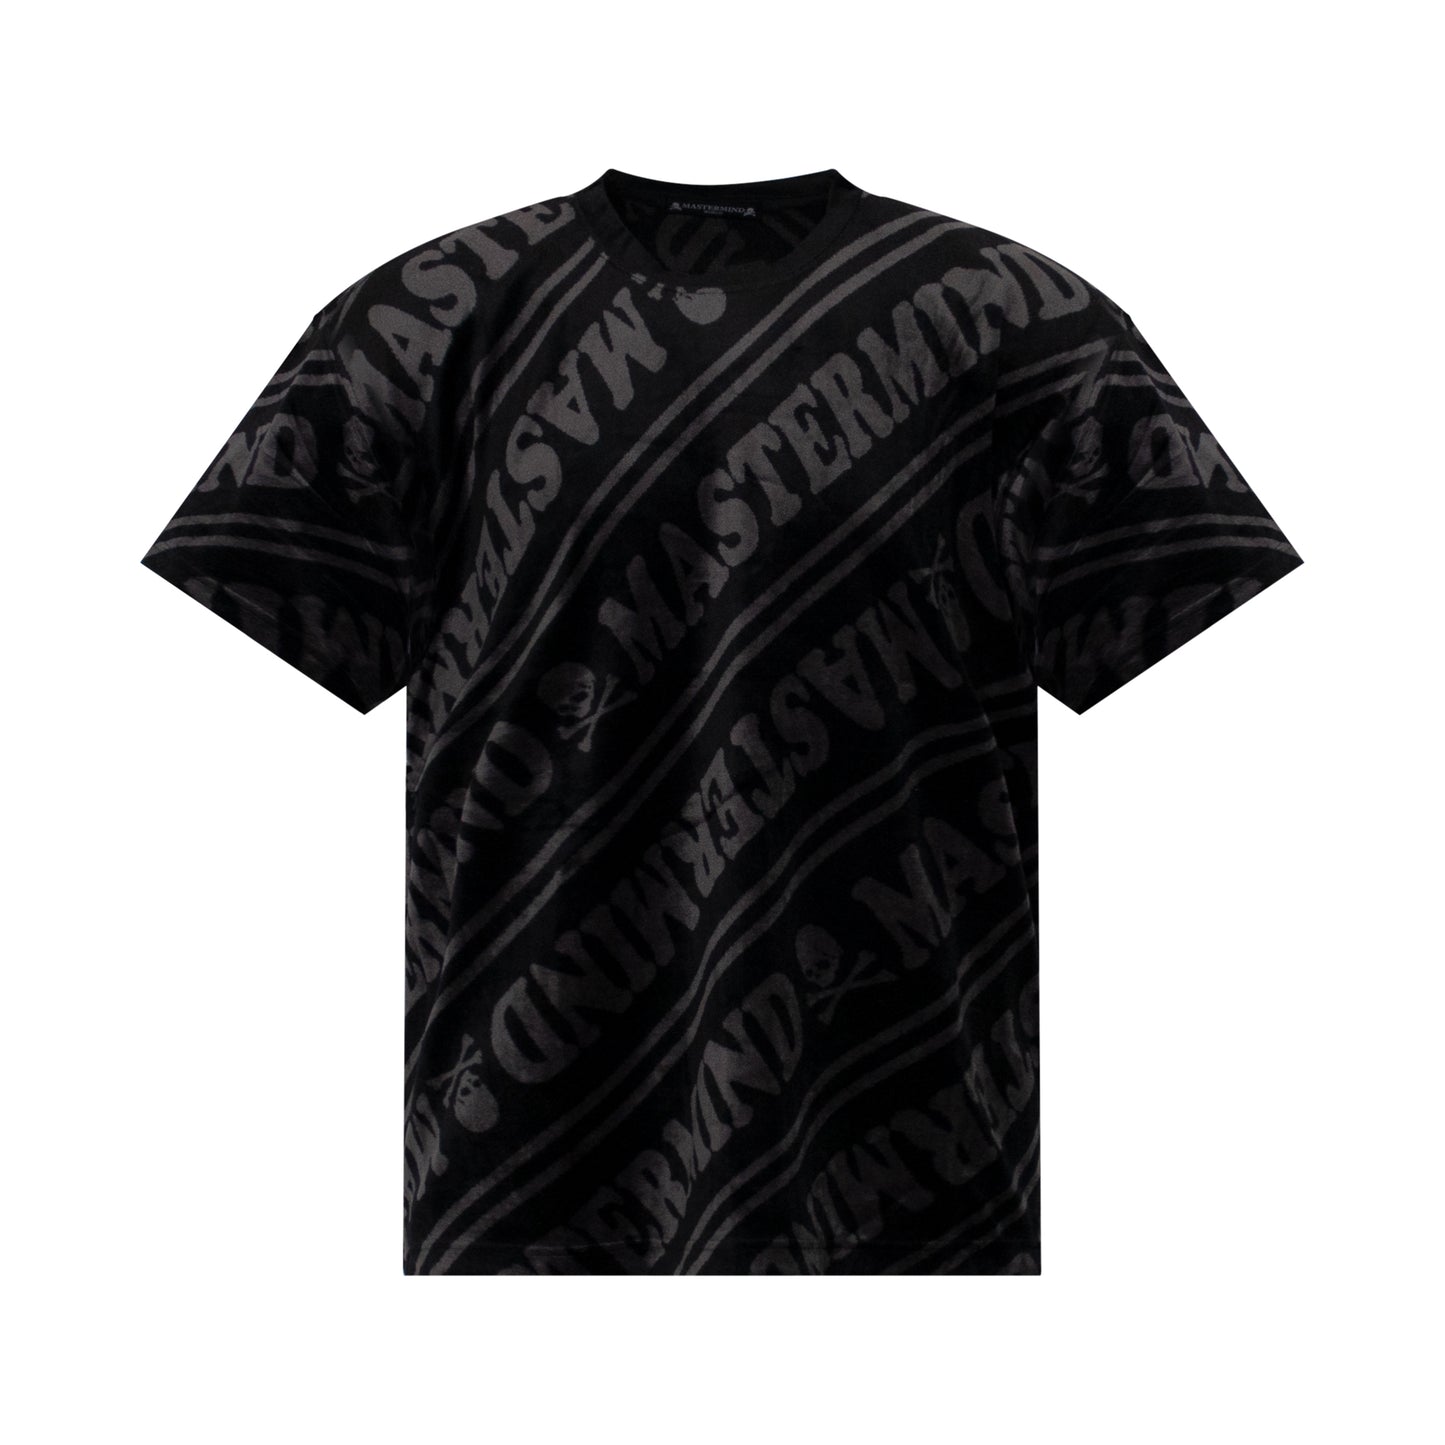 Mastermind World T-Shirt in Black/Charcoal